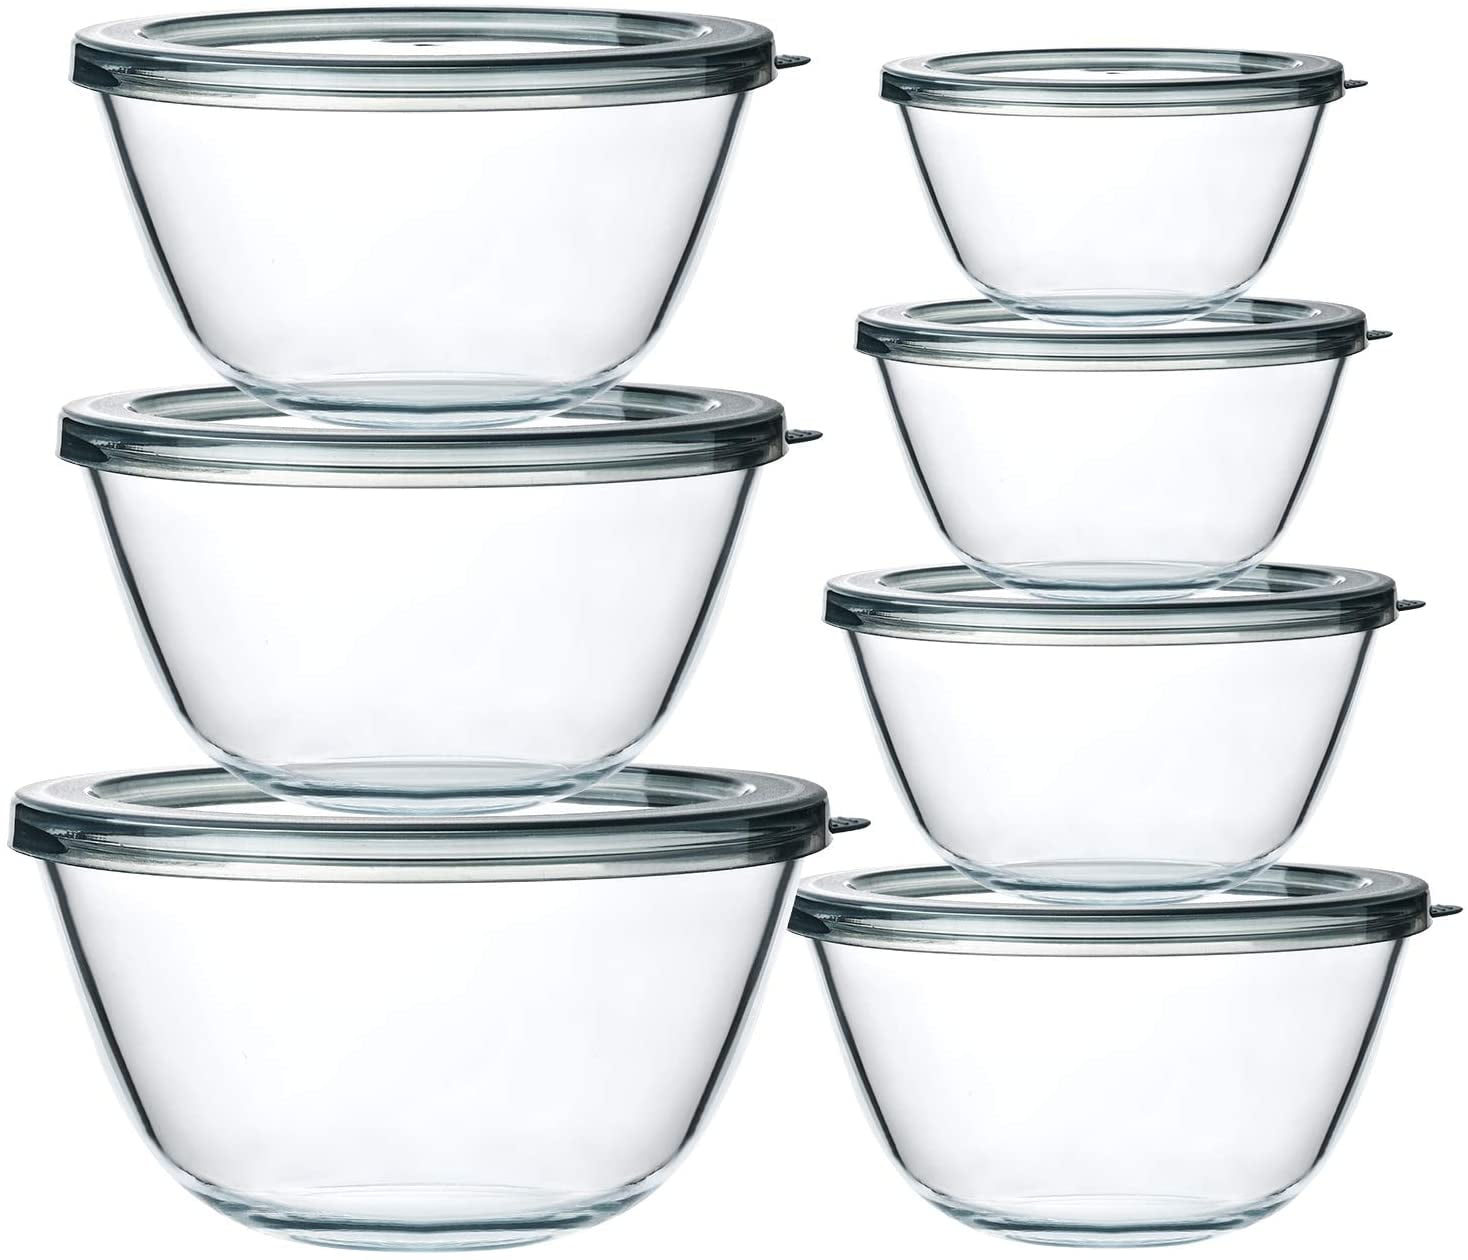 Homearray Kitchen Glass Mixing Bowls with Lids Set for Food Prep Storage and Mixing Fruits, Salads, Meats, Powders, and More - Durable Glass Nesting